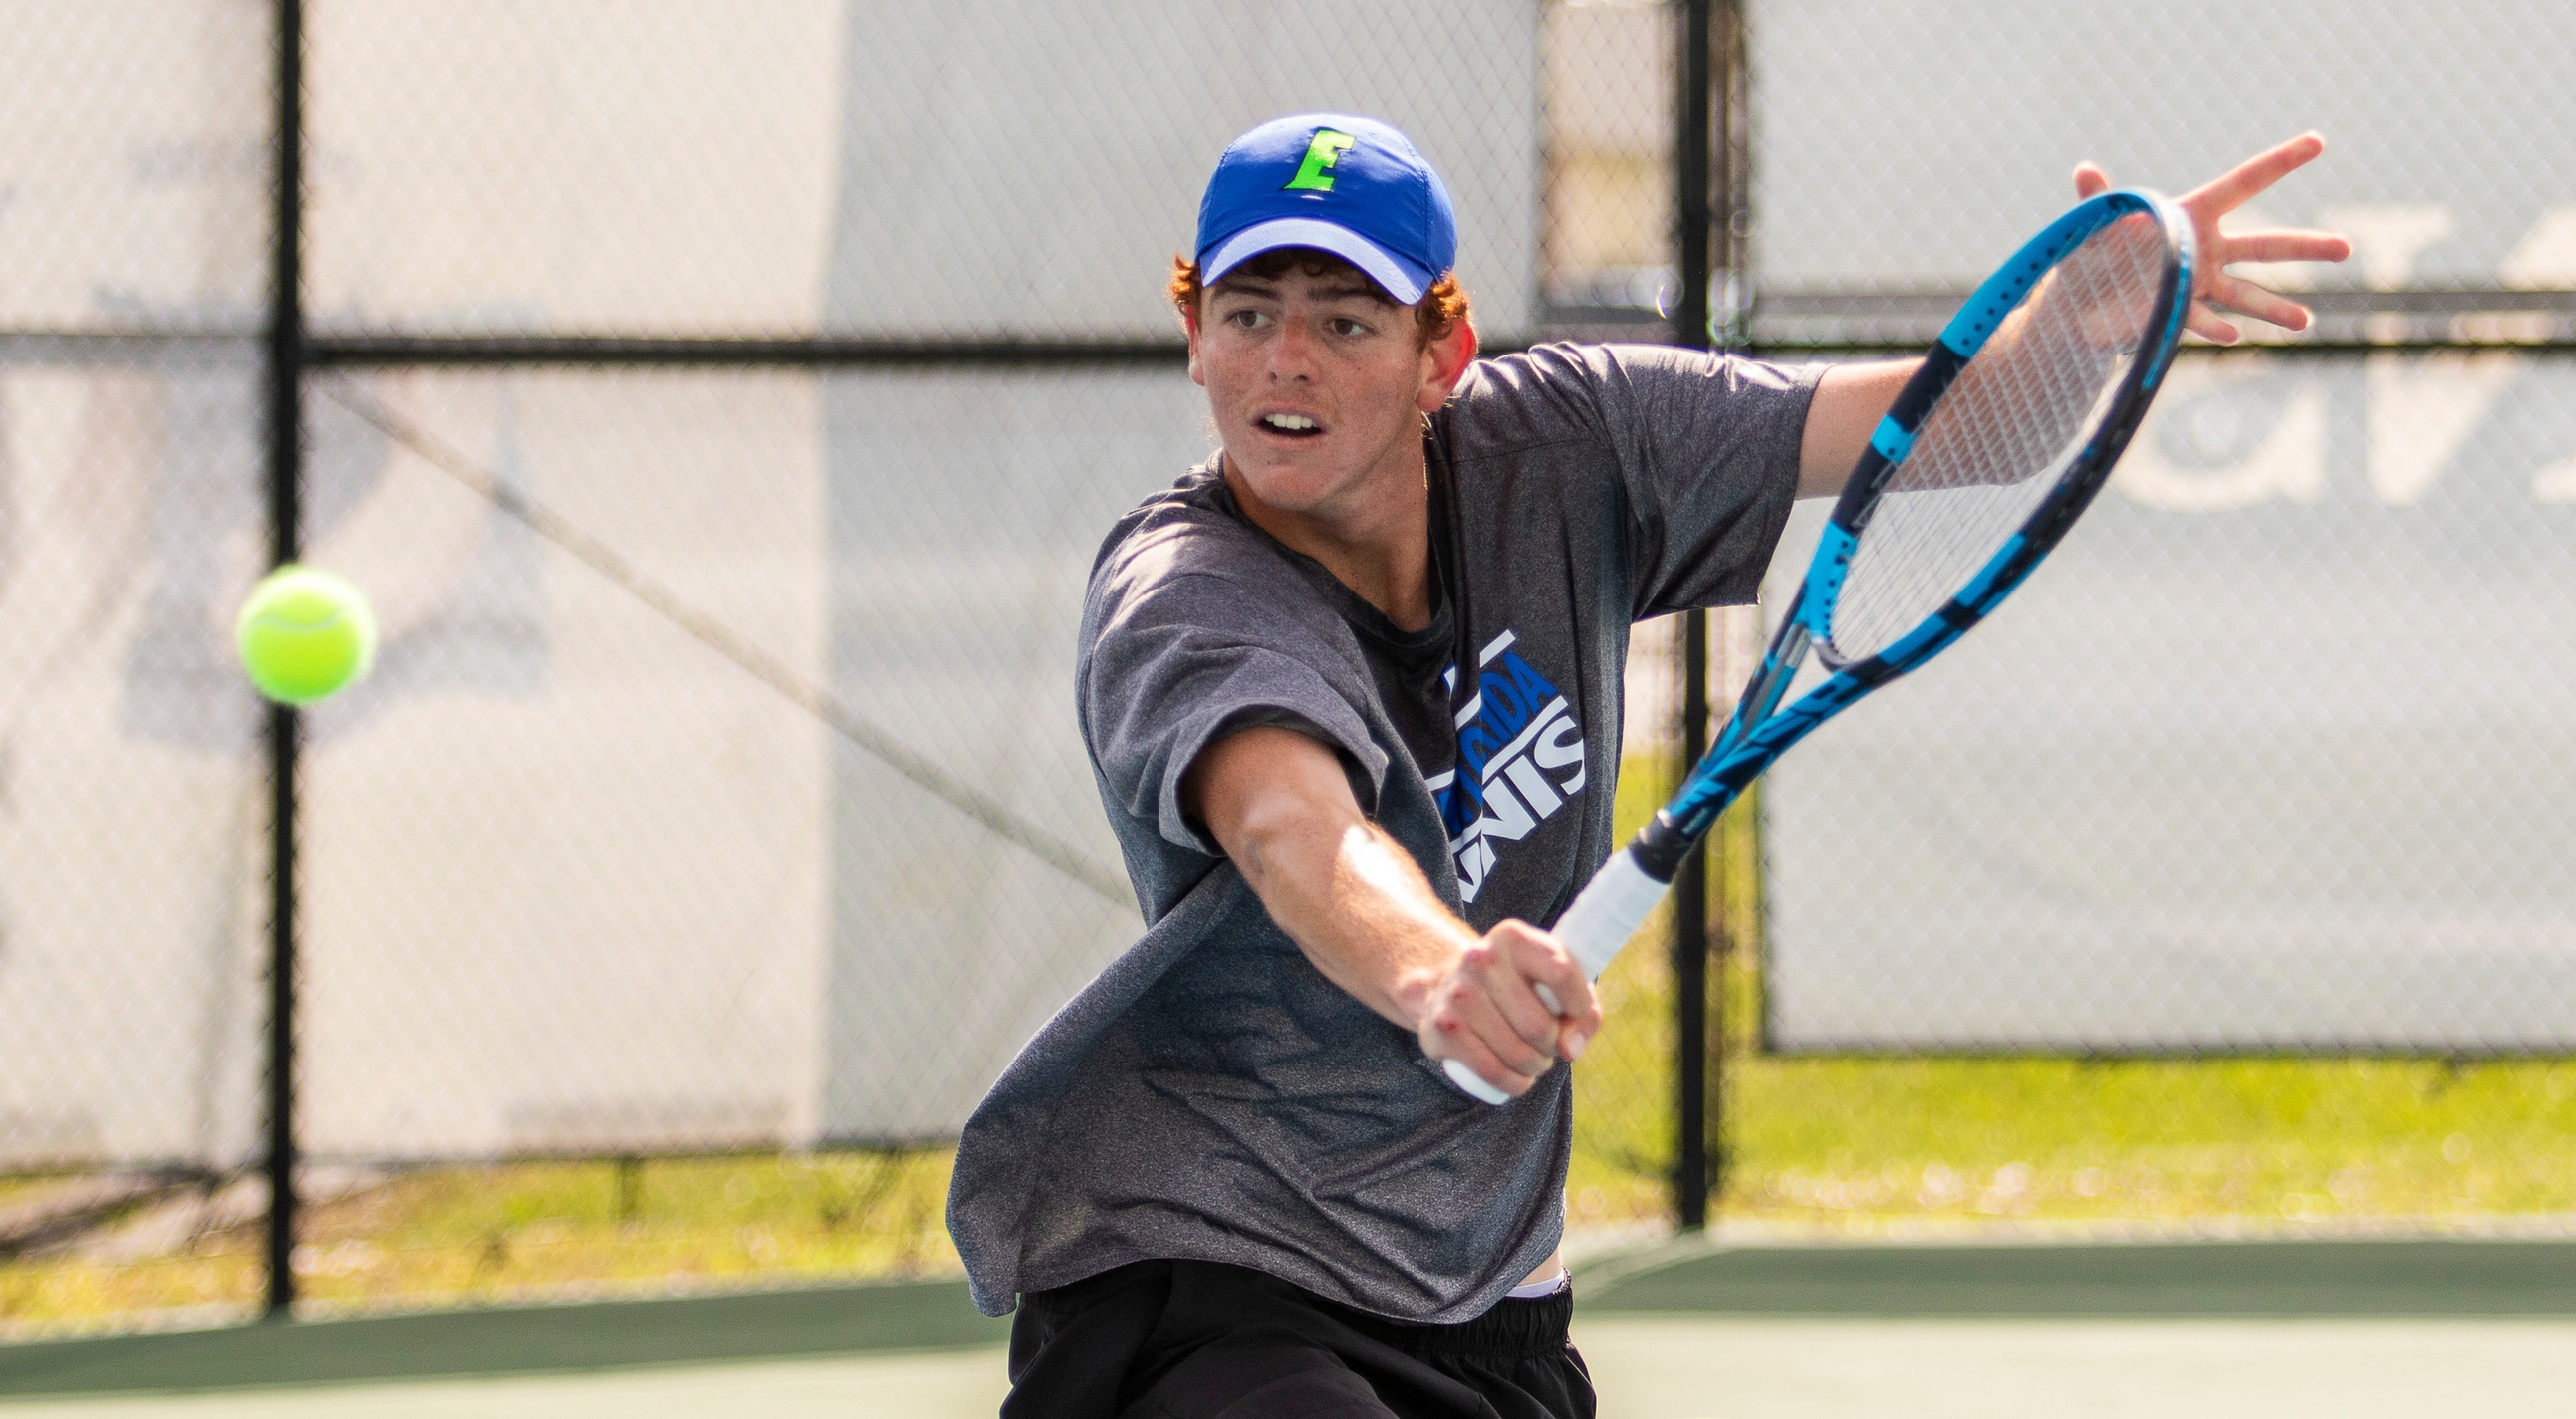 Men's tennis team will open Tyler National Invite with top 10 matchup Sunday